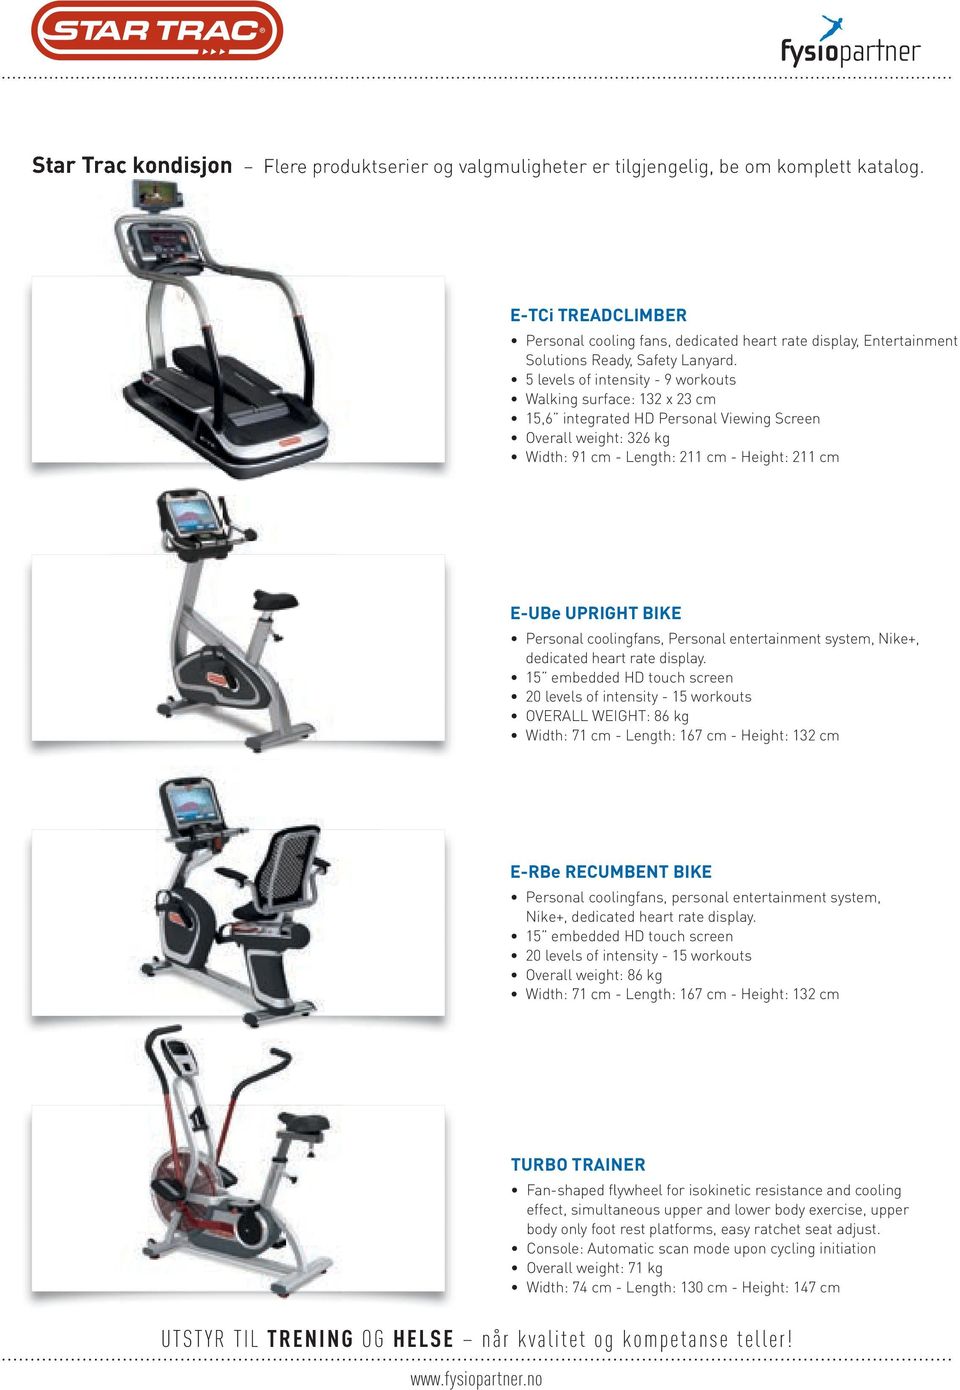 5 levels of intensity - 9 workouts Walking surface: 132 x 23 cm 15,6 integrated HD Personal Viewing Screen Overall weight: 326 kg Width: 91 cm - Length: 211 cm - Height: 211 cm E-UBe UPRIGHT BIKE